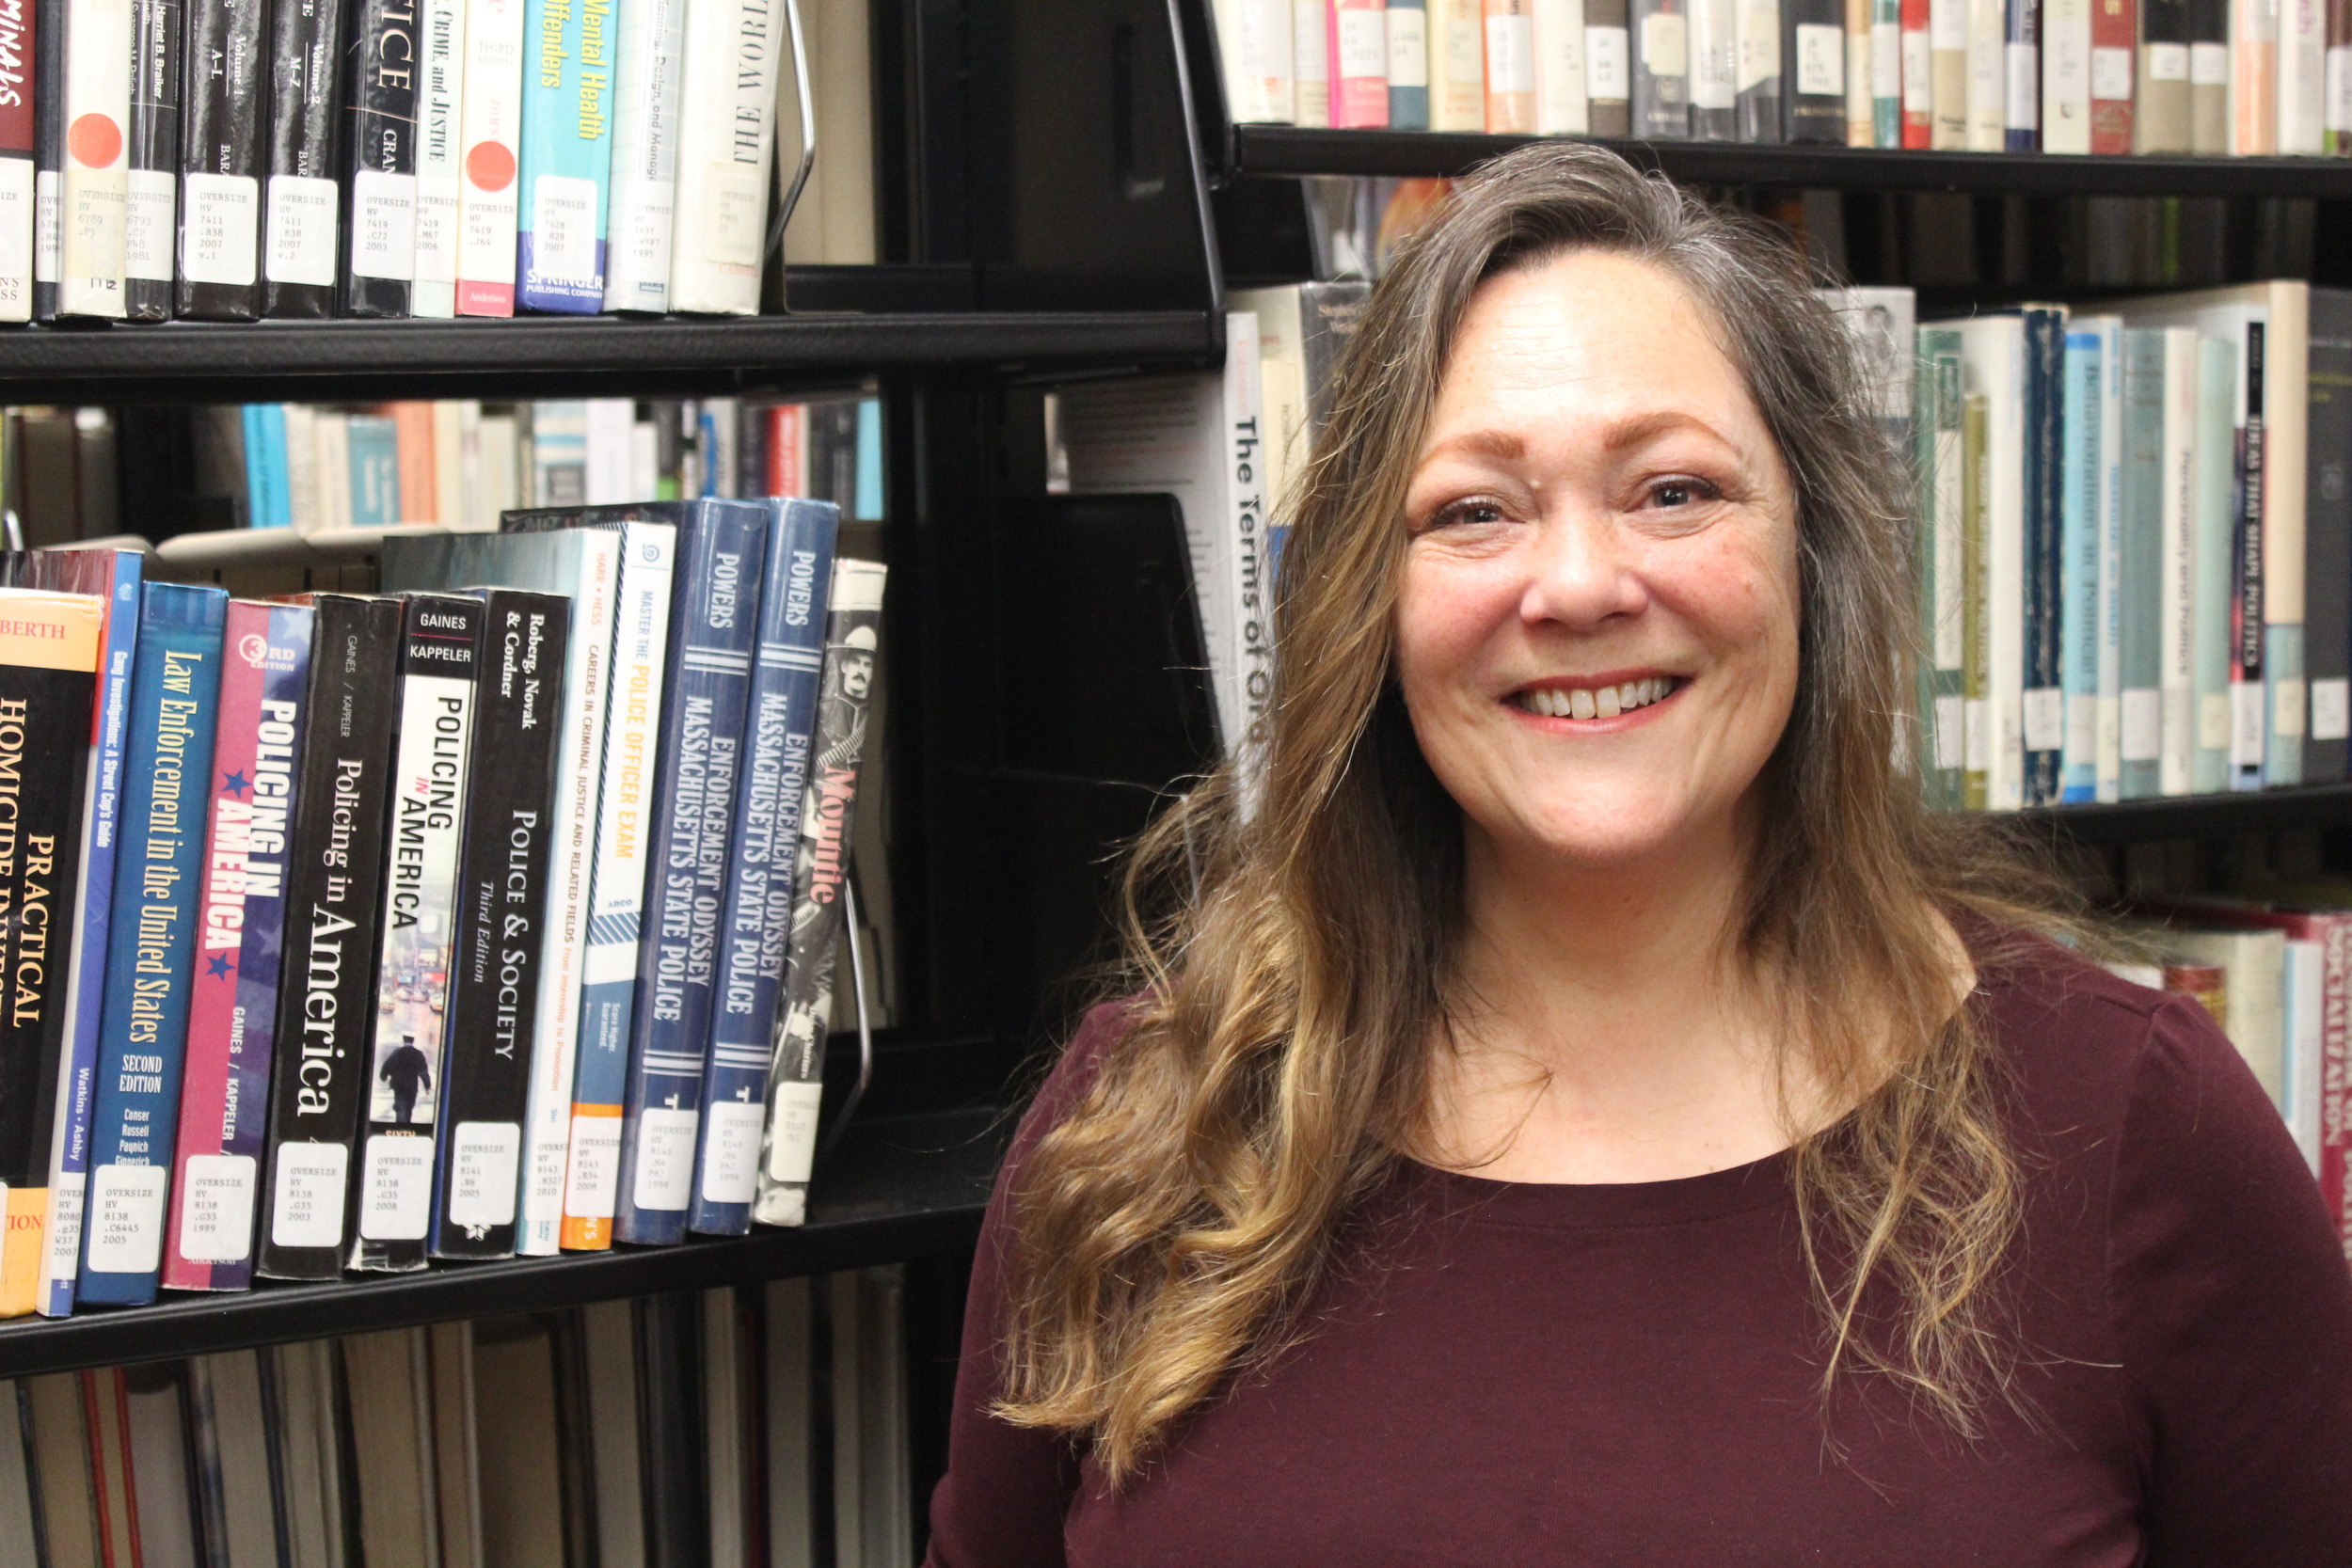 Professor Delaney stands next to the library stack where her book is shelved. She is looking at the camera and smiling.